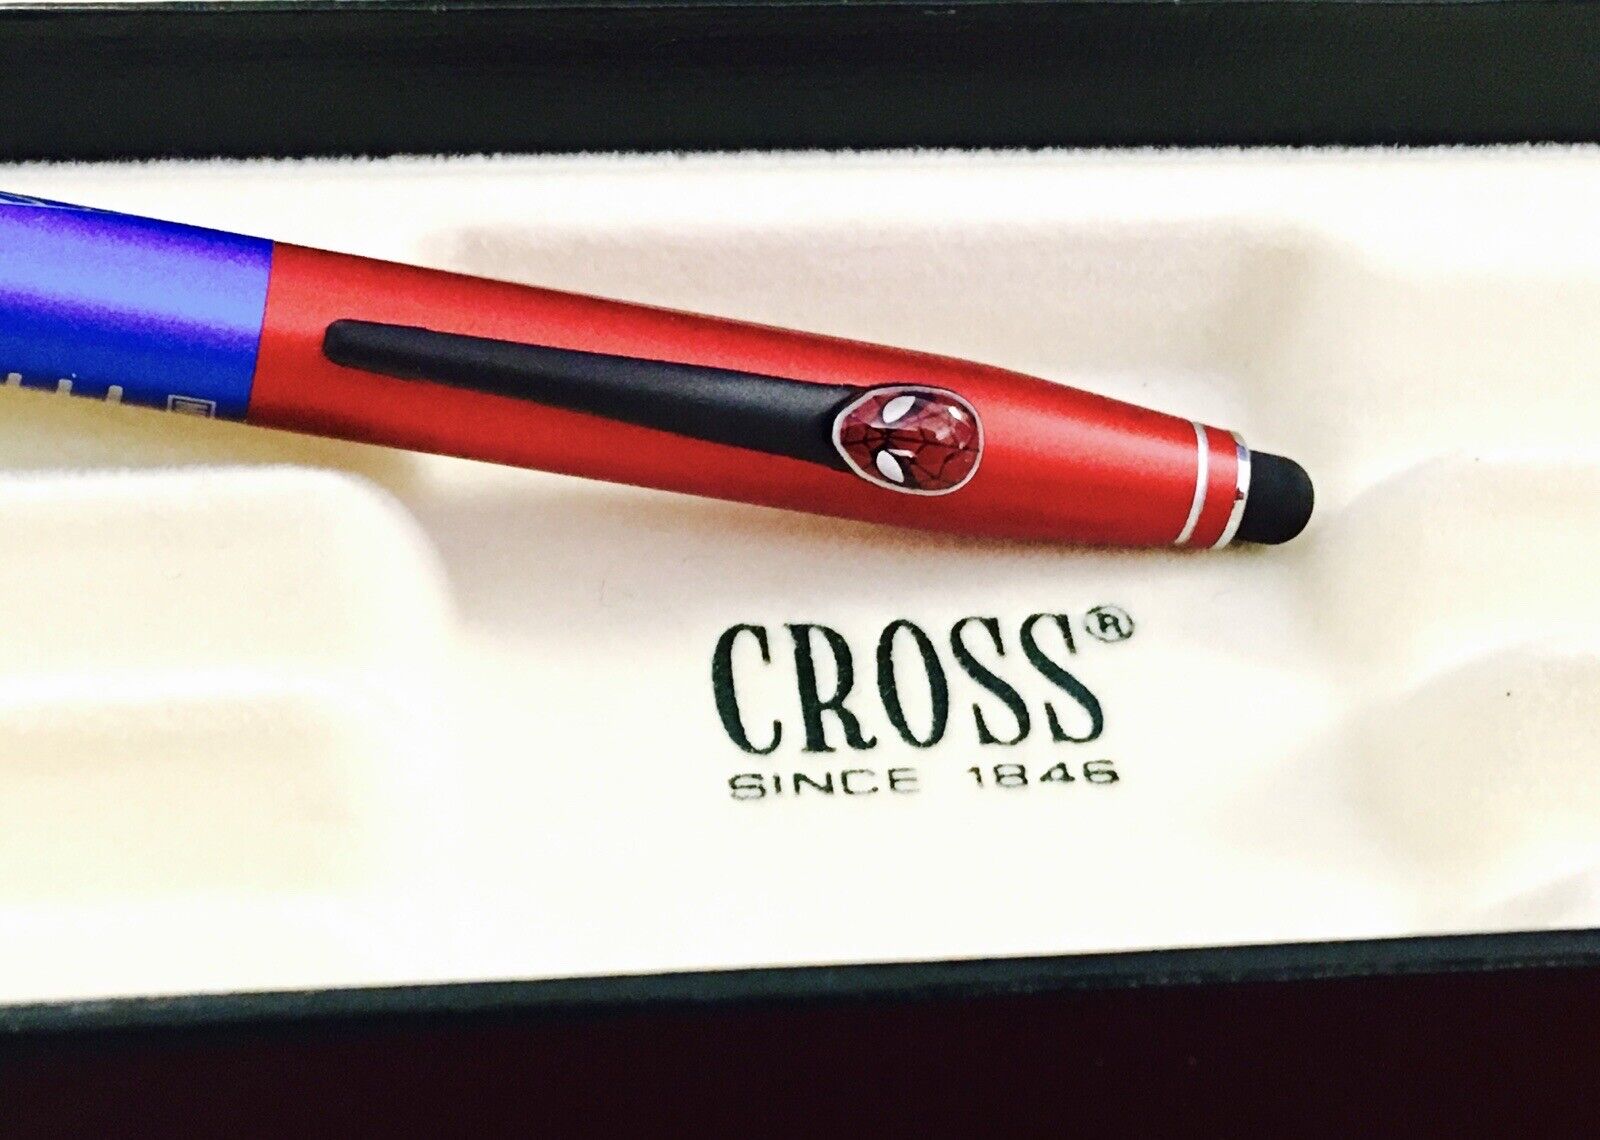 CROSS “Tech 2”  Stylus Pen Marvel Super Heroes “SPIDER-MAN” NOS With Box